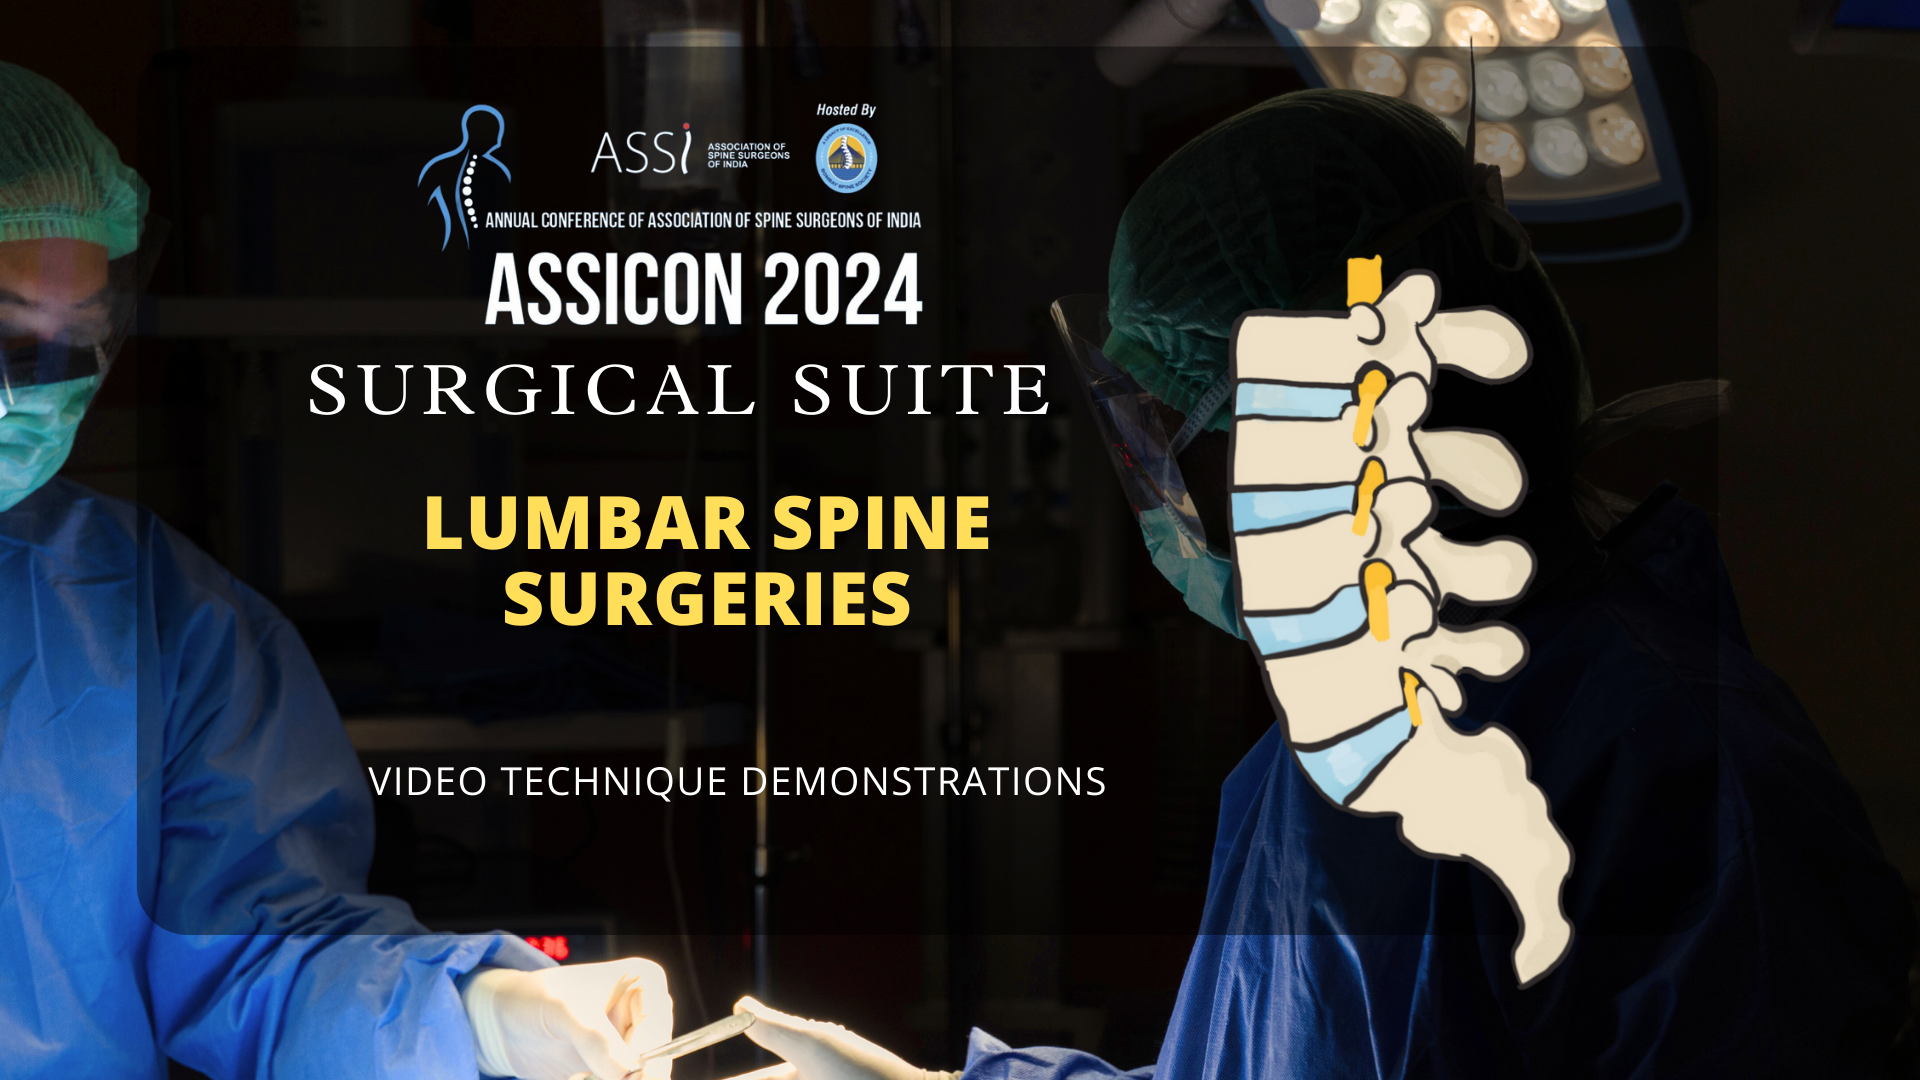 ASSICON SURGICAL SUITE LUMBAR SPINE